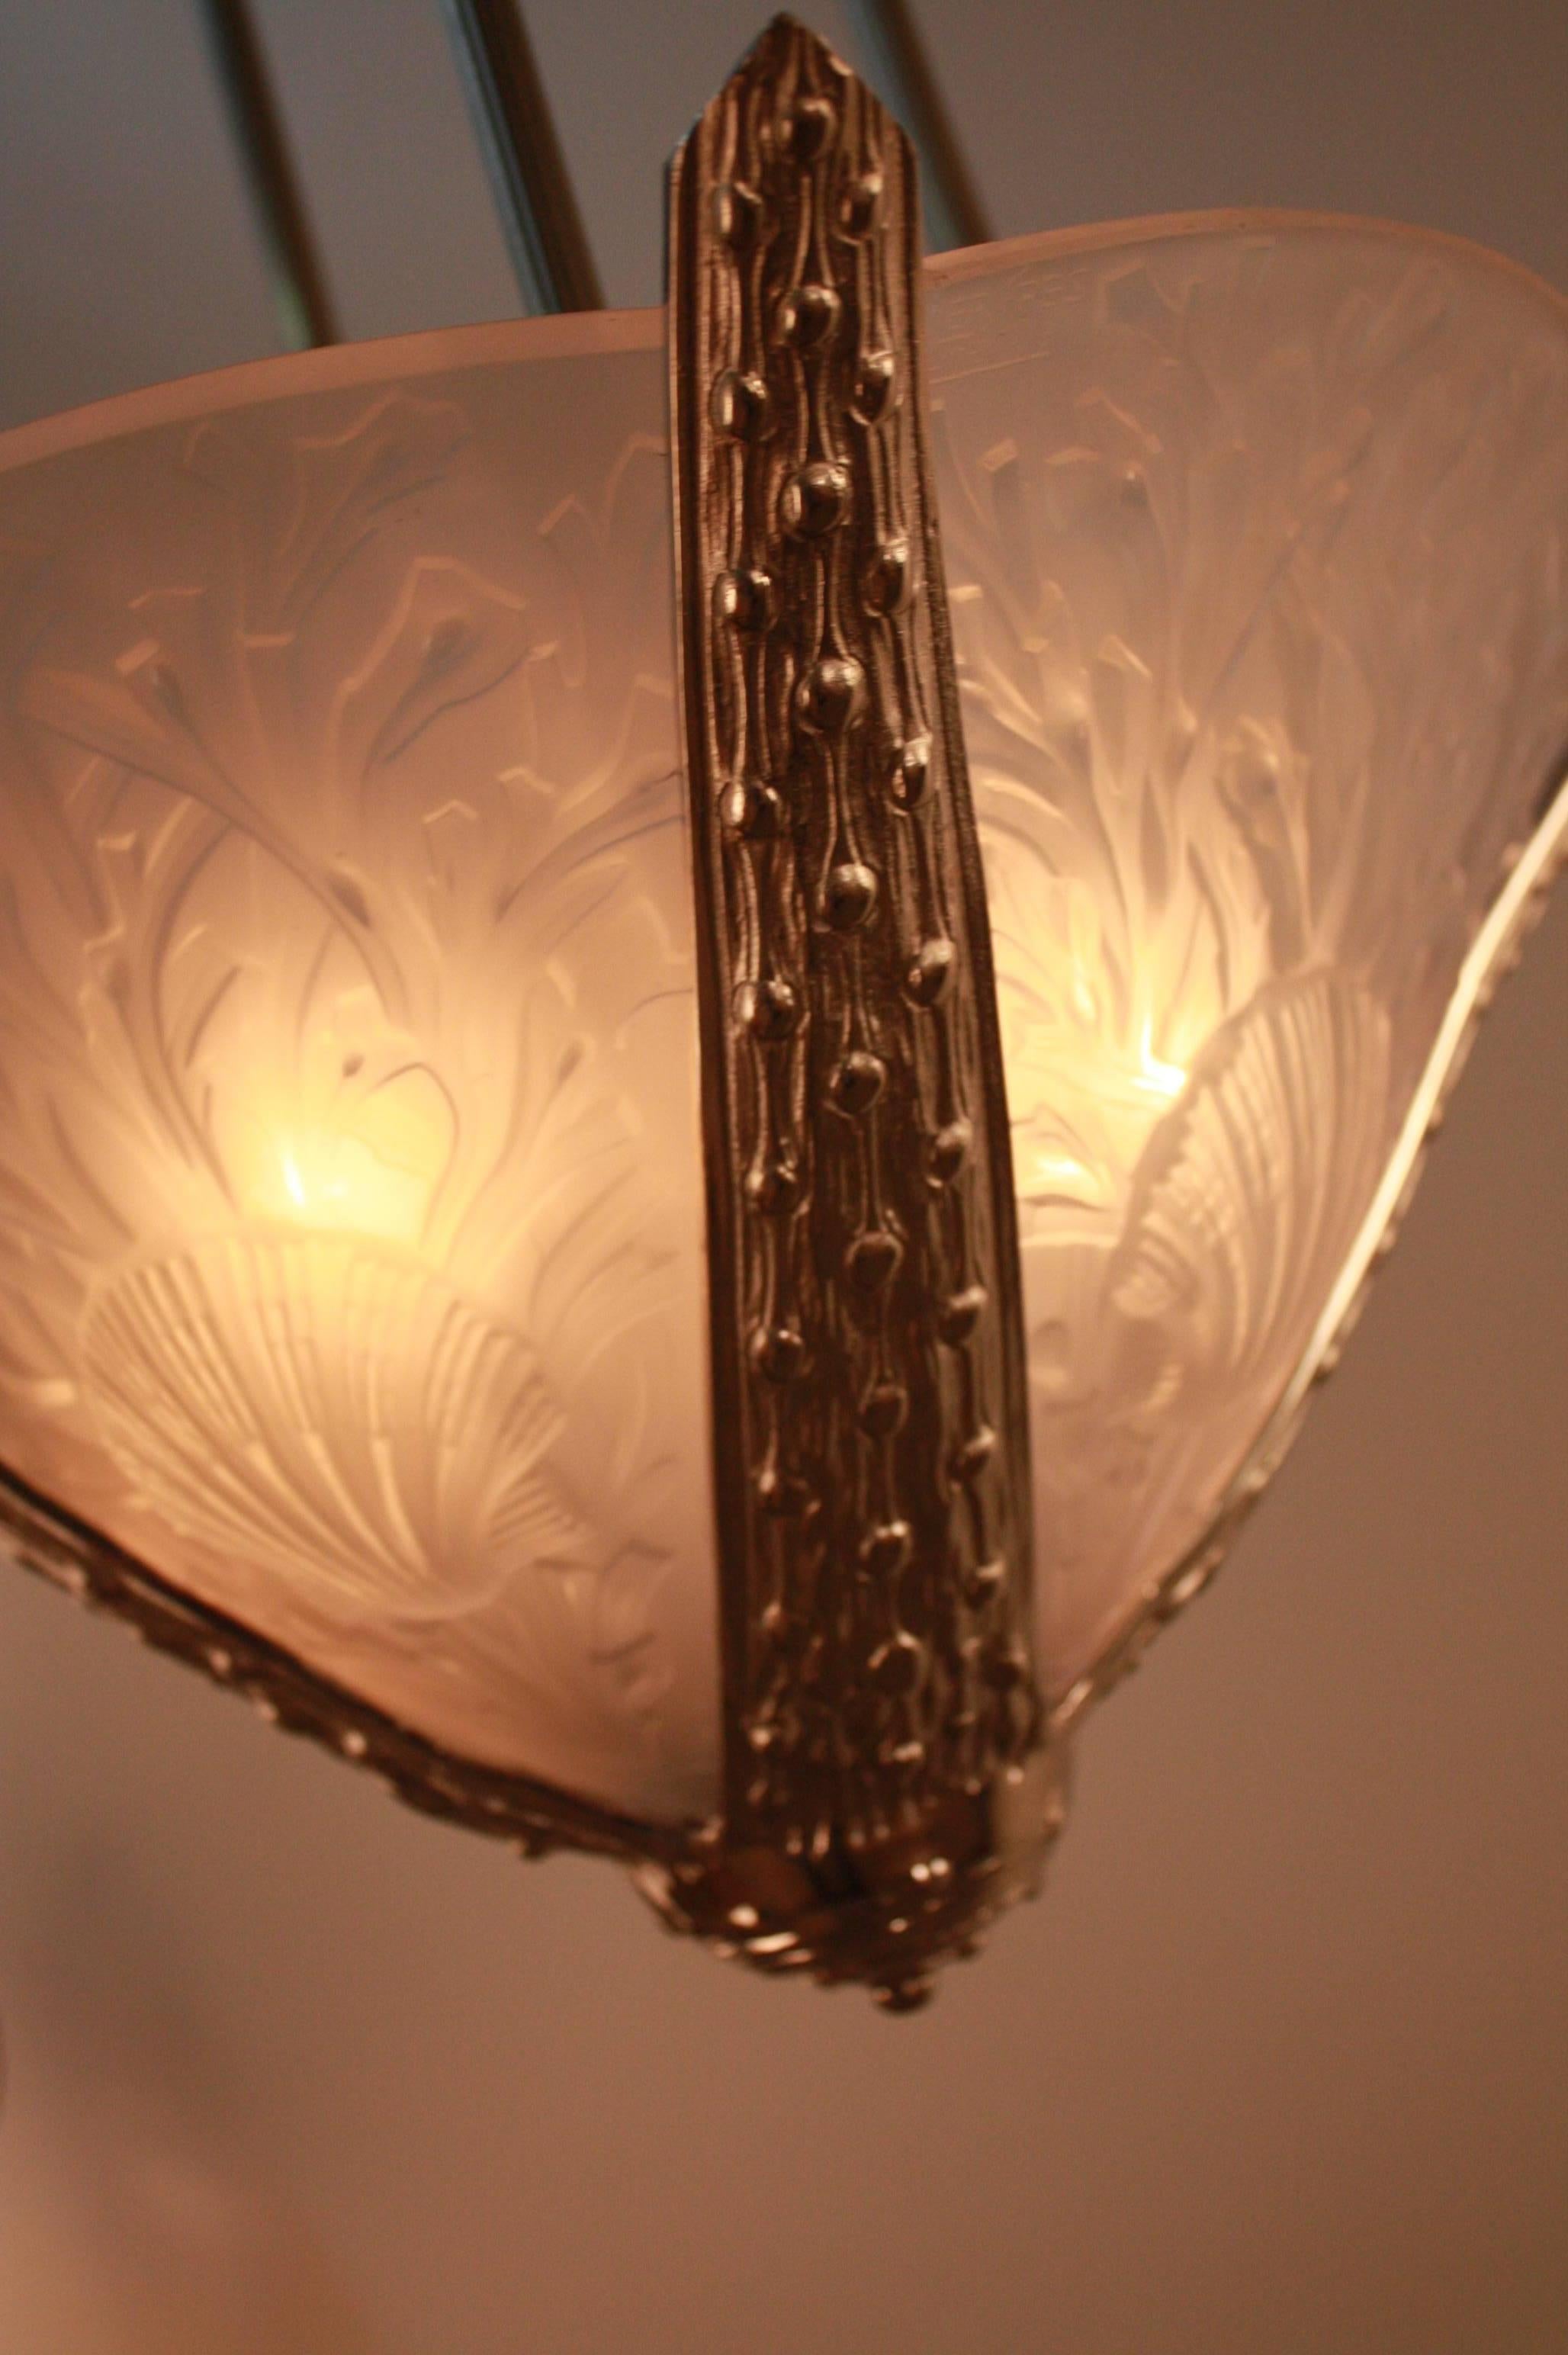 Plated Exquisite Art Deco Chandelier by Muller